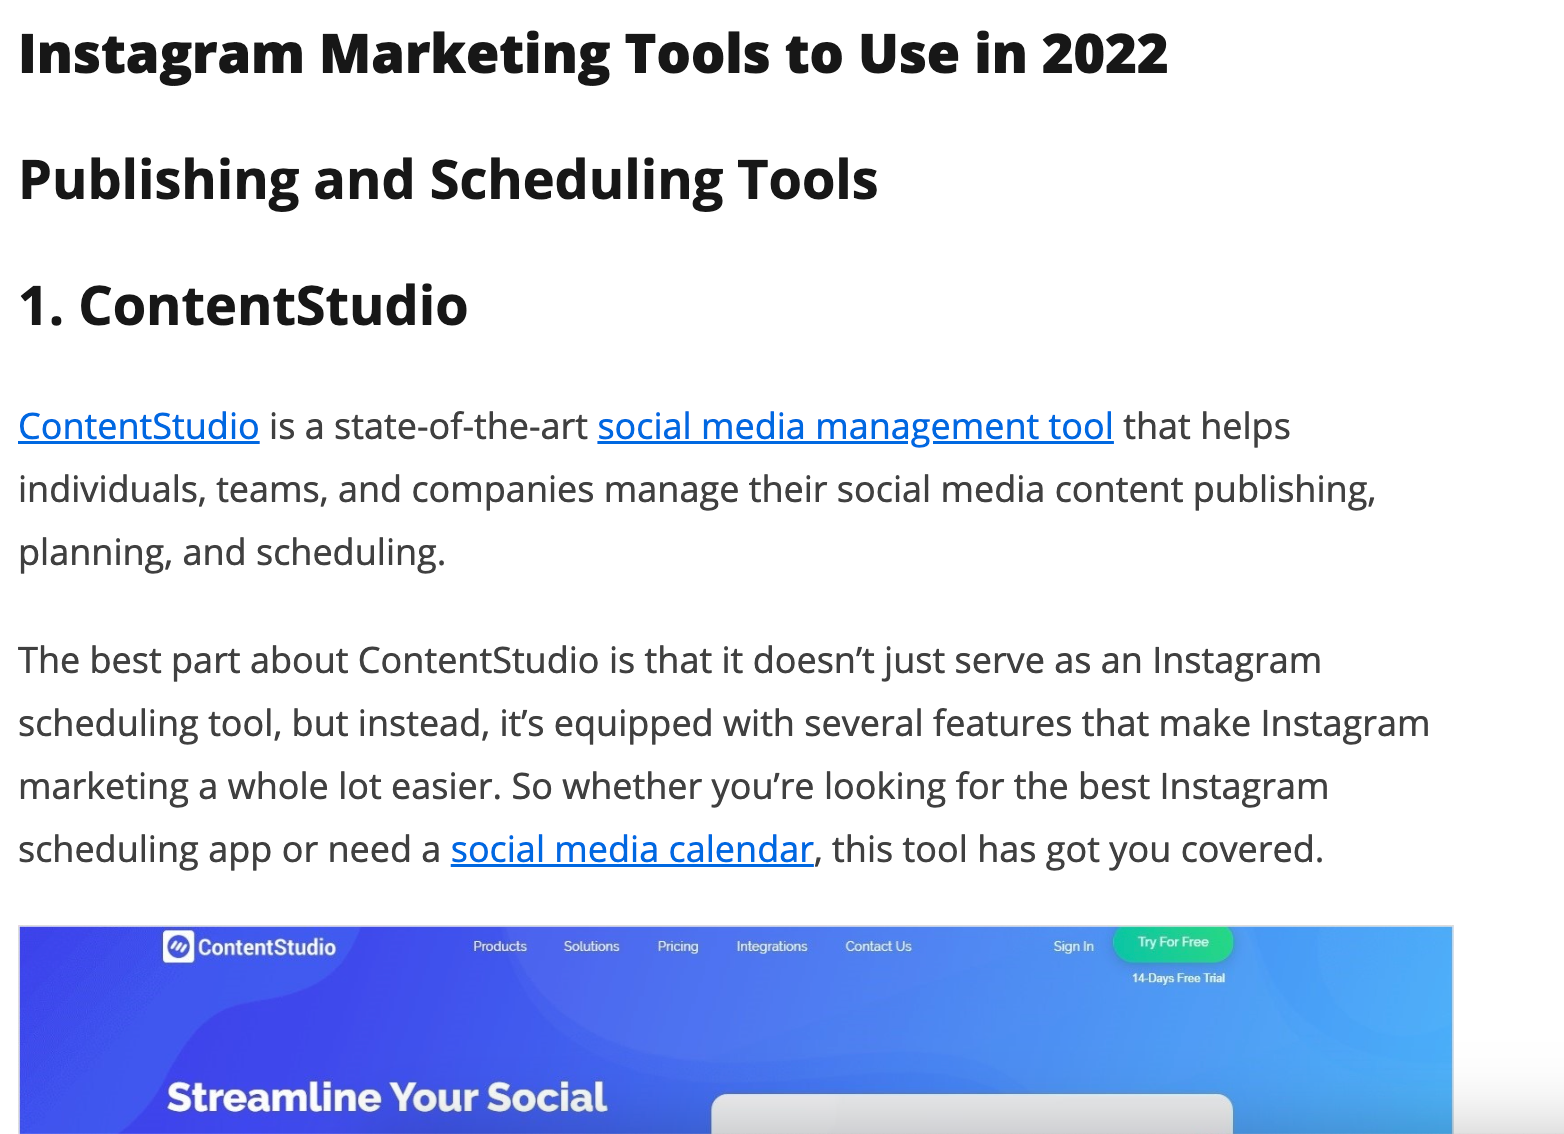 Review Your Marketing Tools